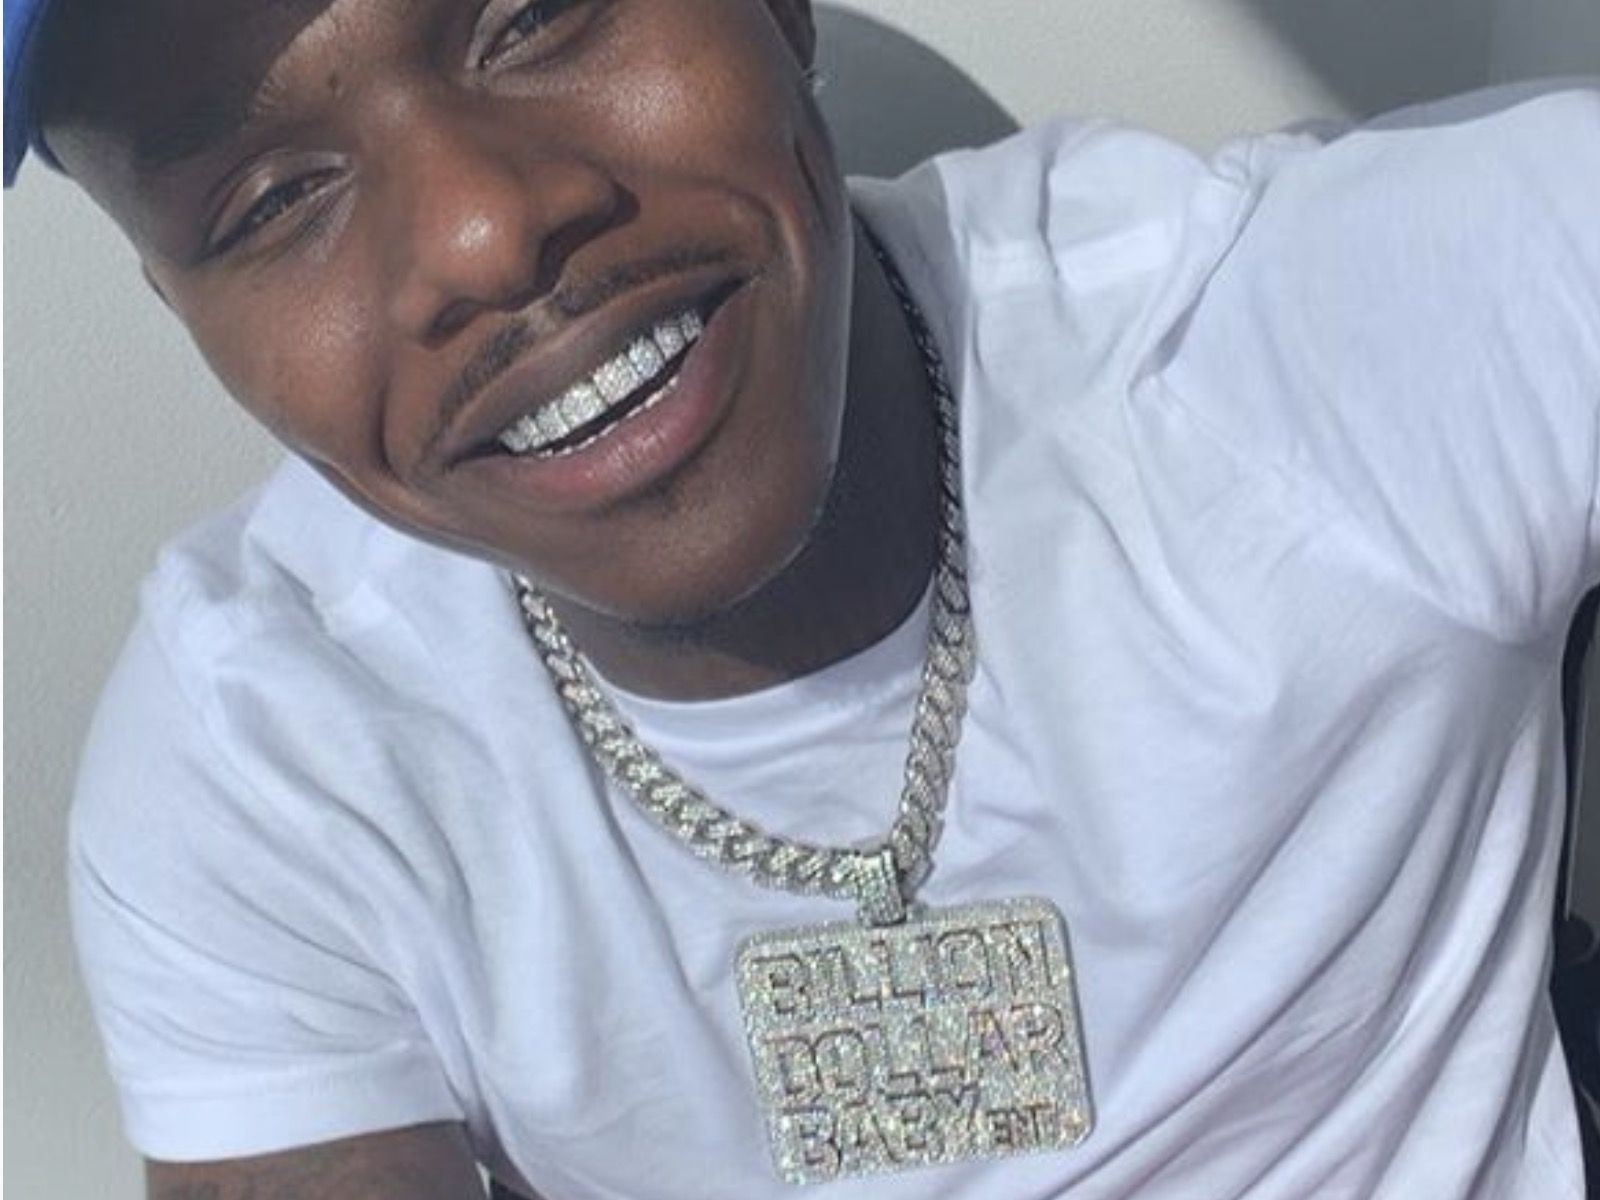 DaBaby Wallpaper Free DaBaby Background